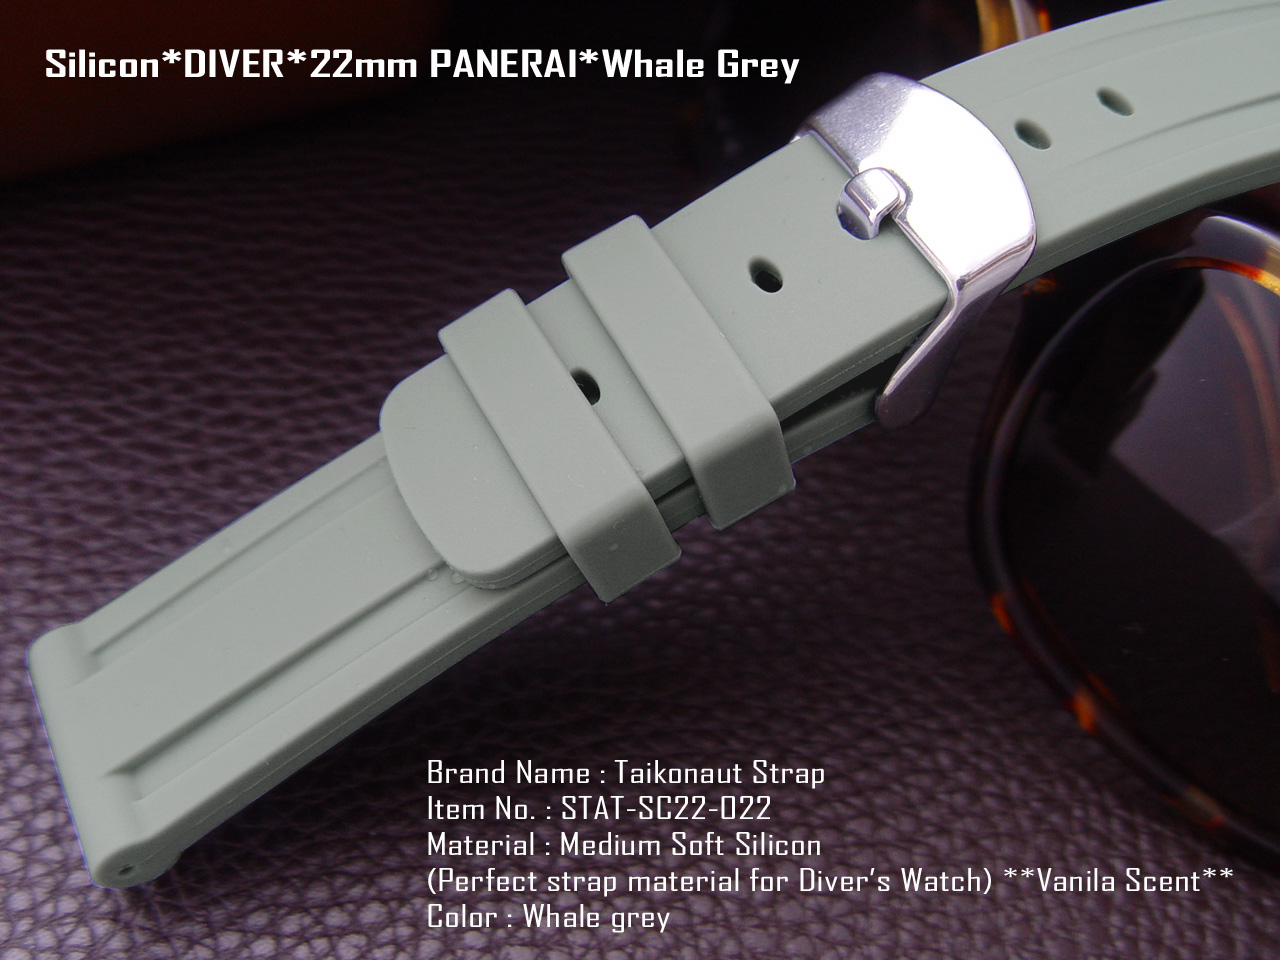 22mm Whale Grey Silicone Diver Watch Band Watch Strap